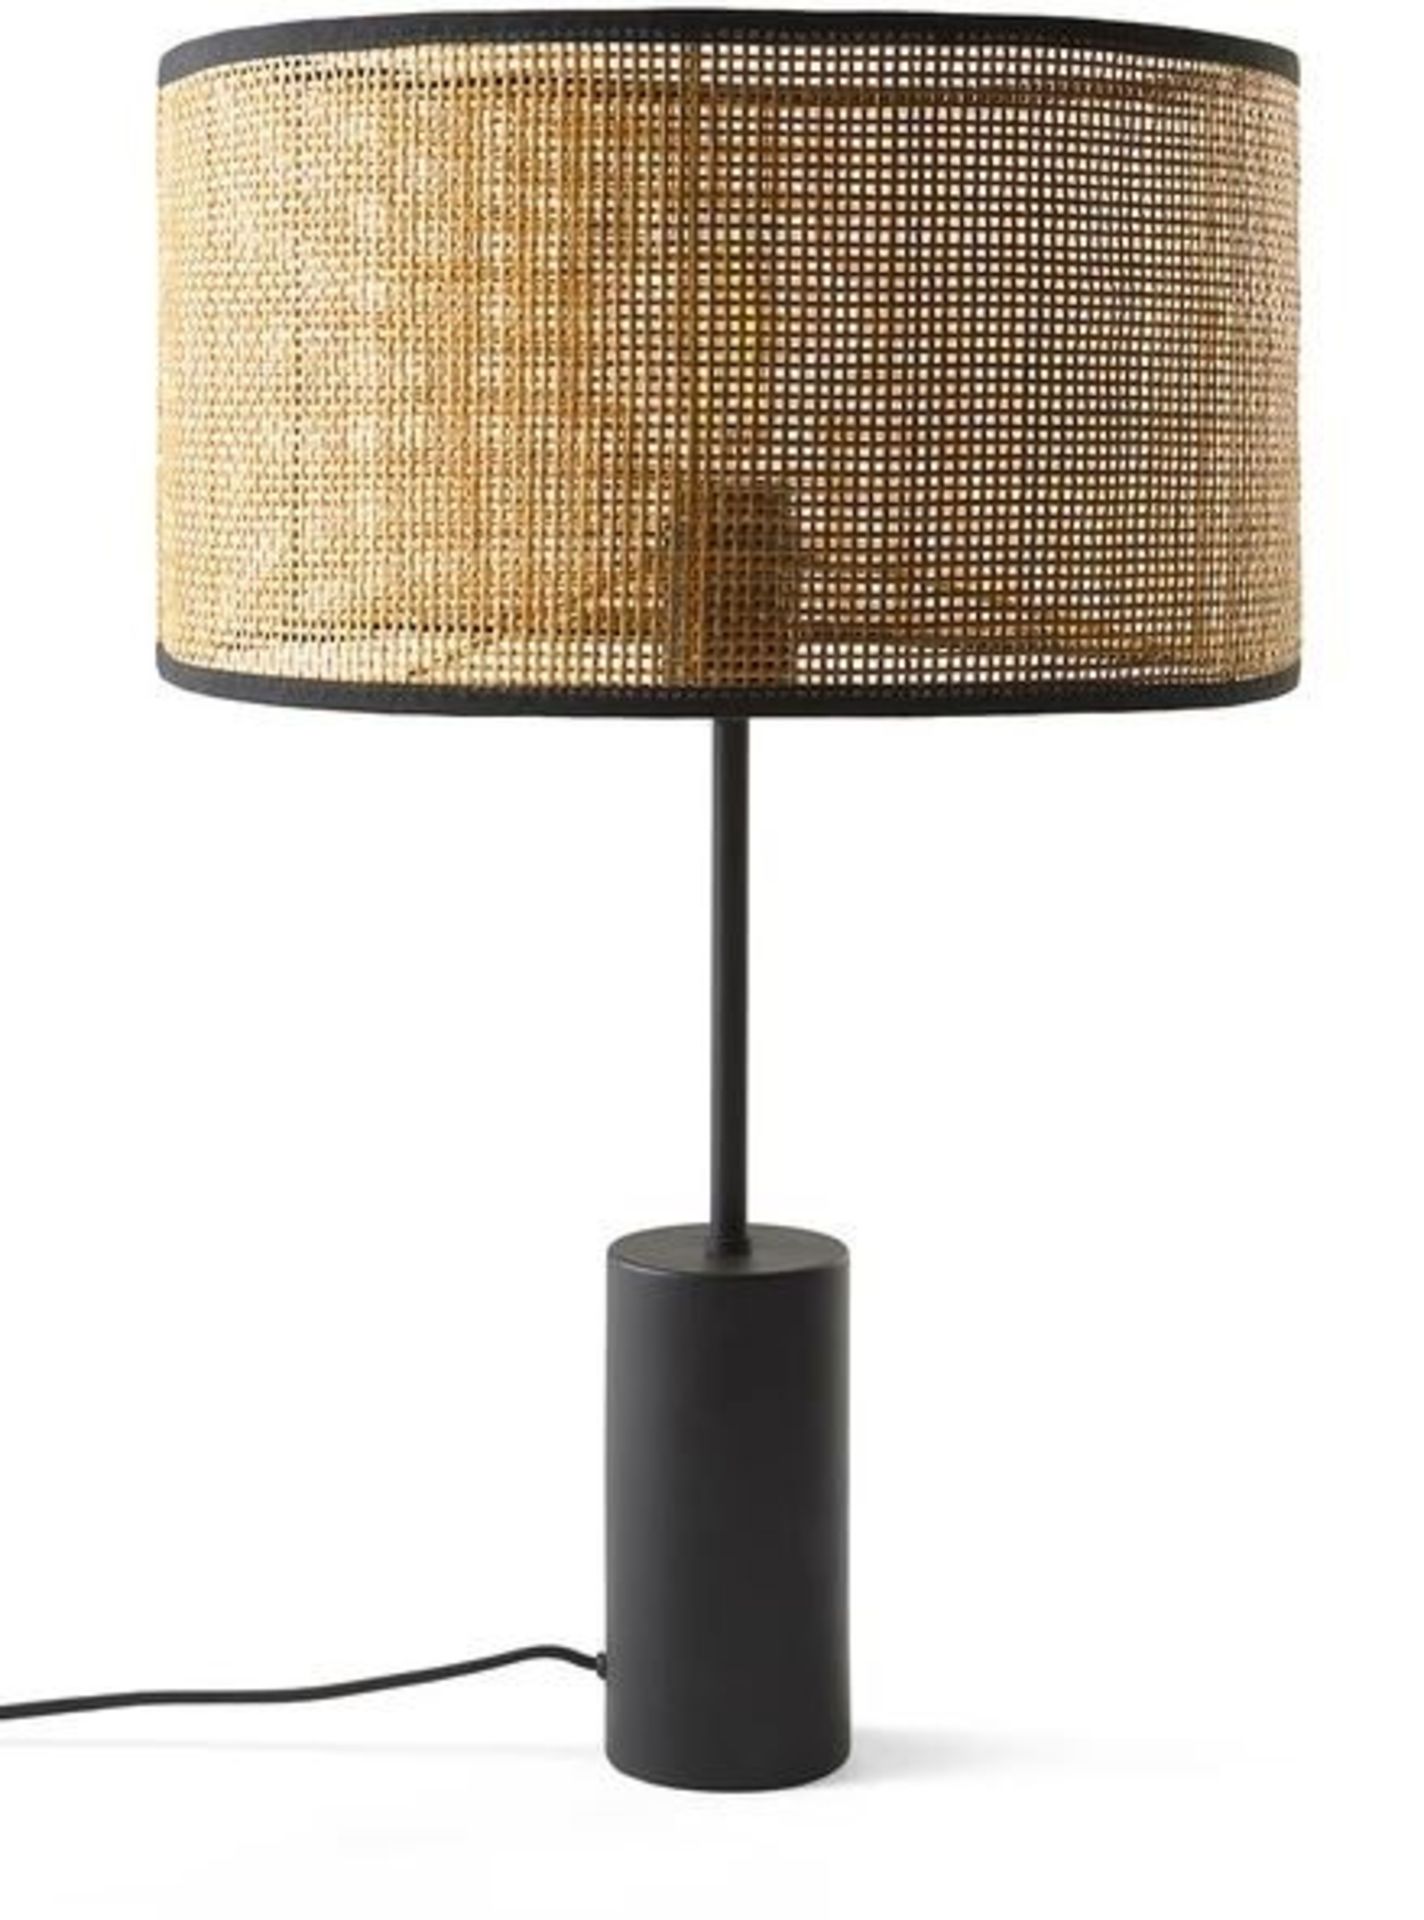 LA REDOUTE CARA METAL AND CANE TABLE LAMP